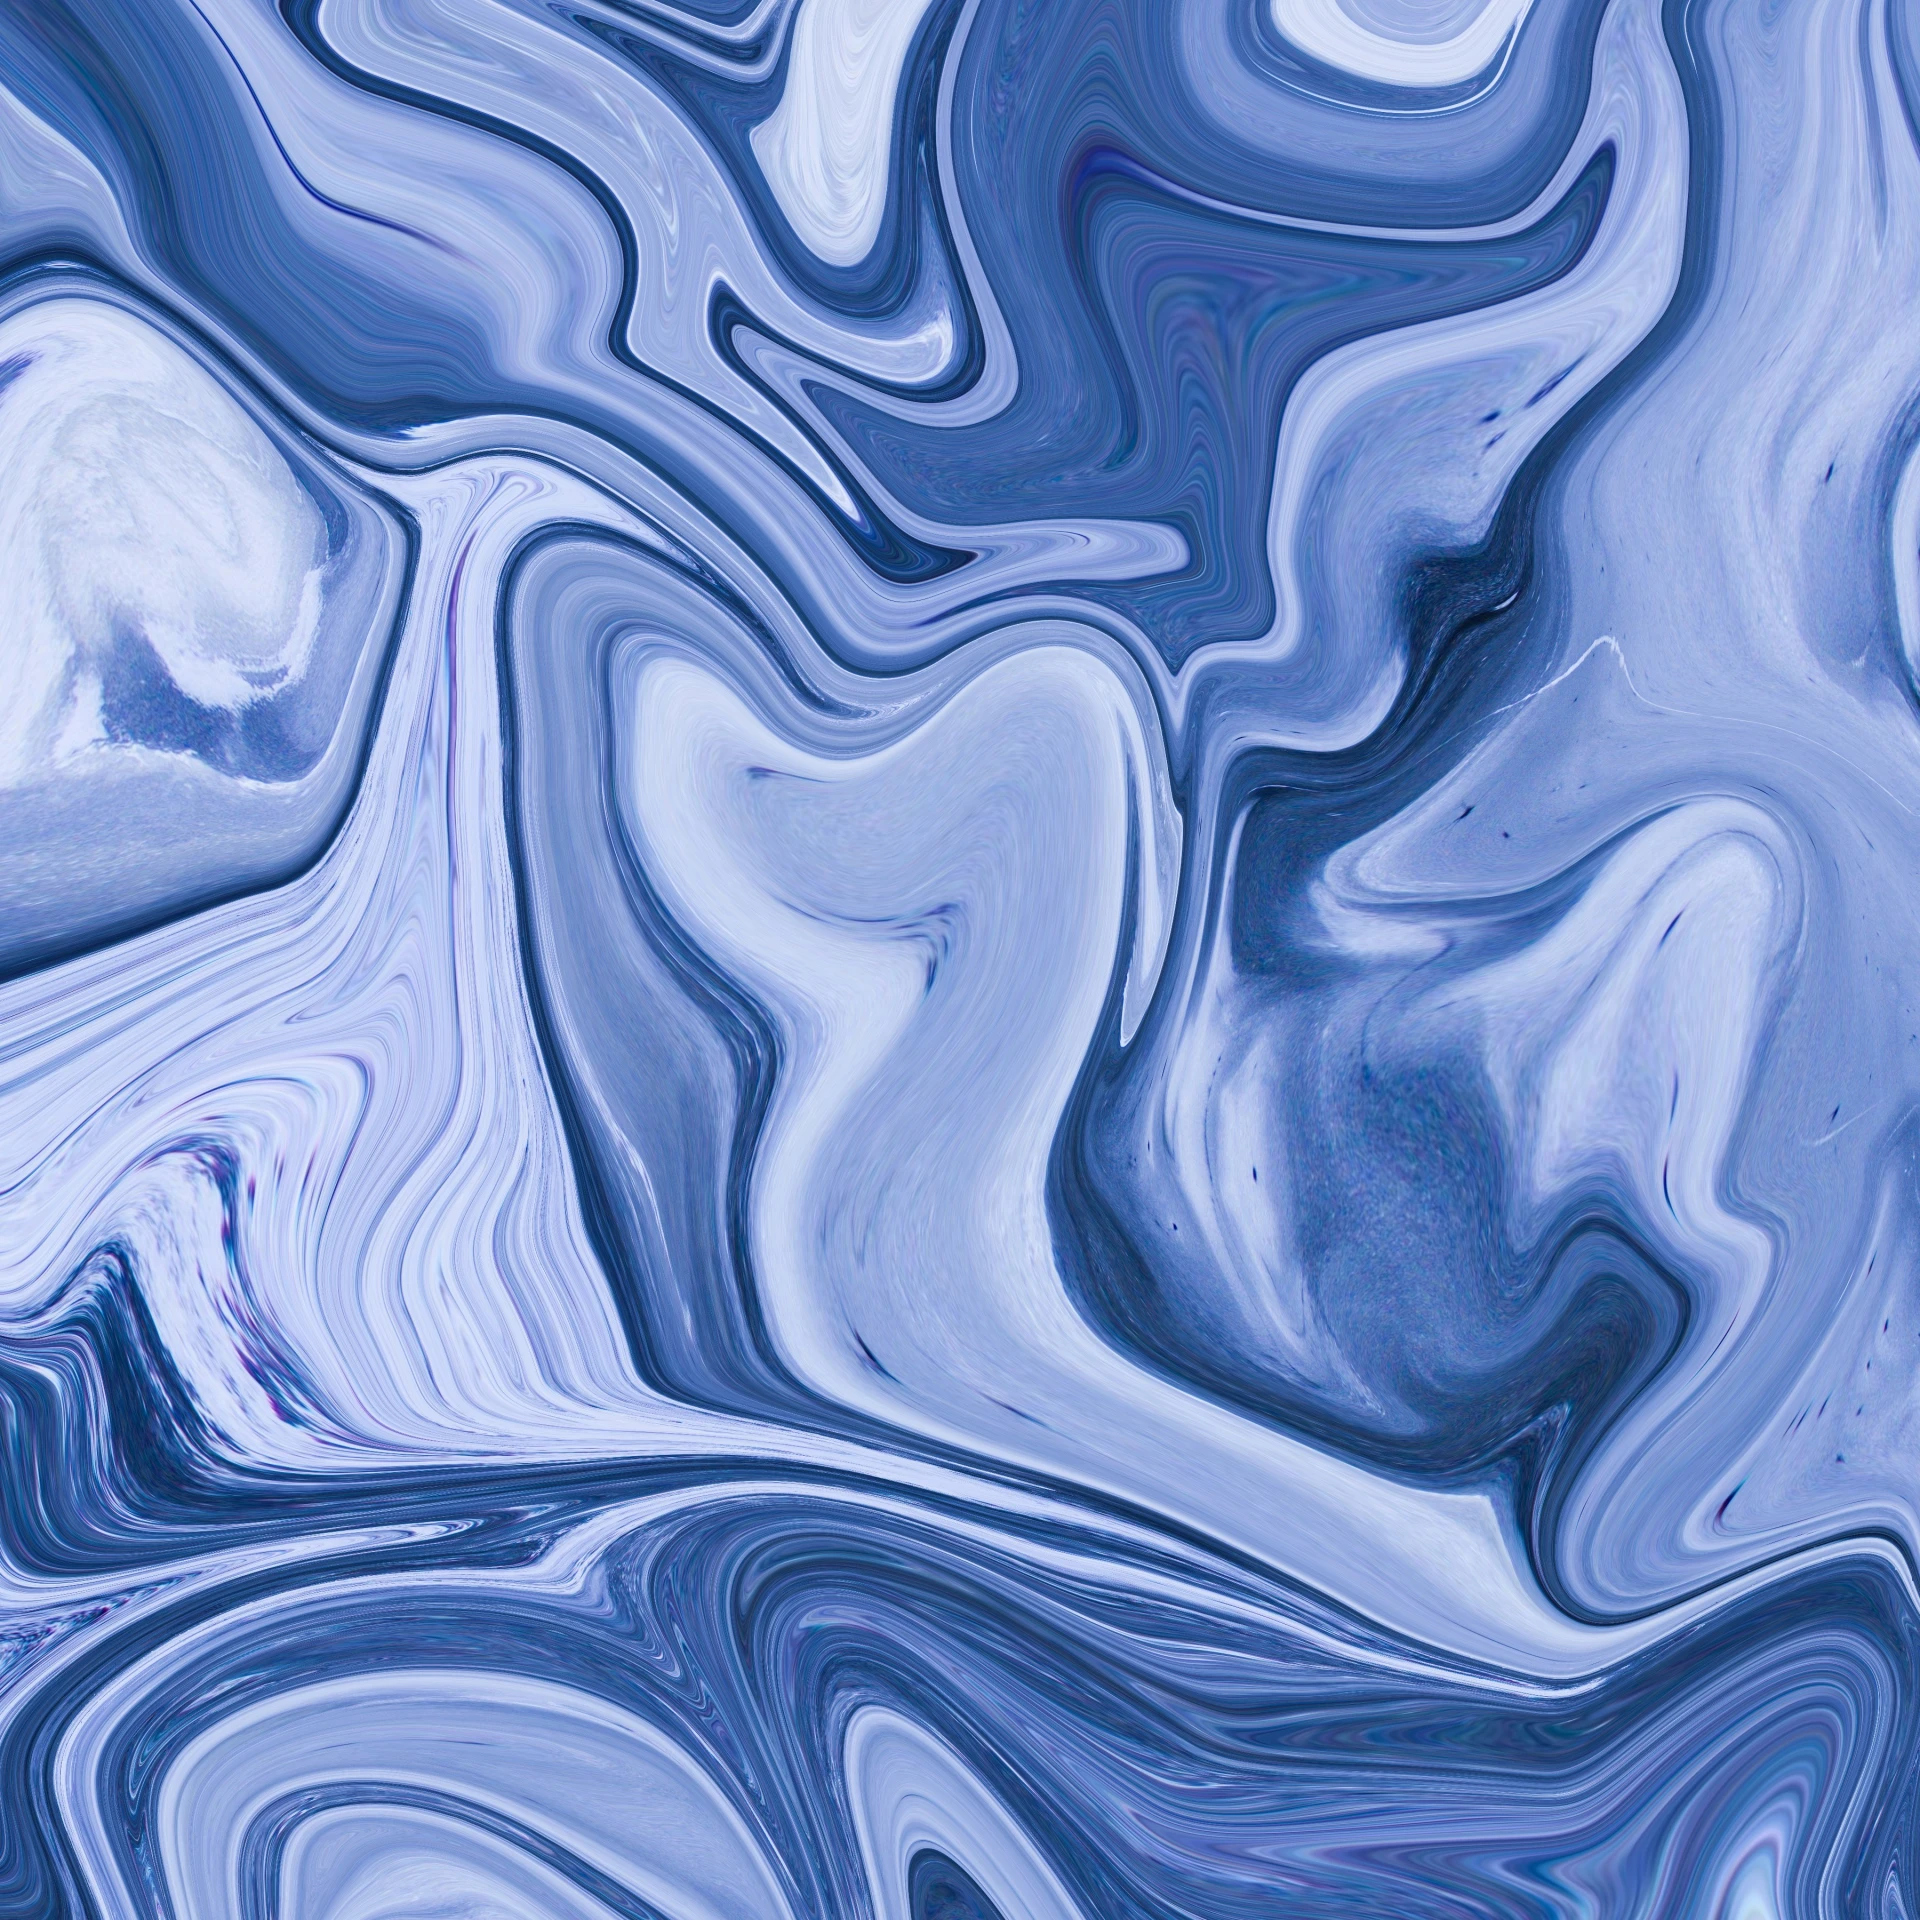 marble paper texture background blue swirl pattern with high resolution and high quality